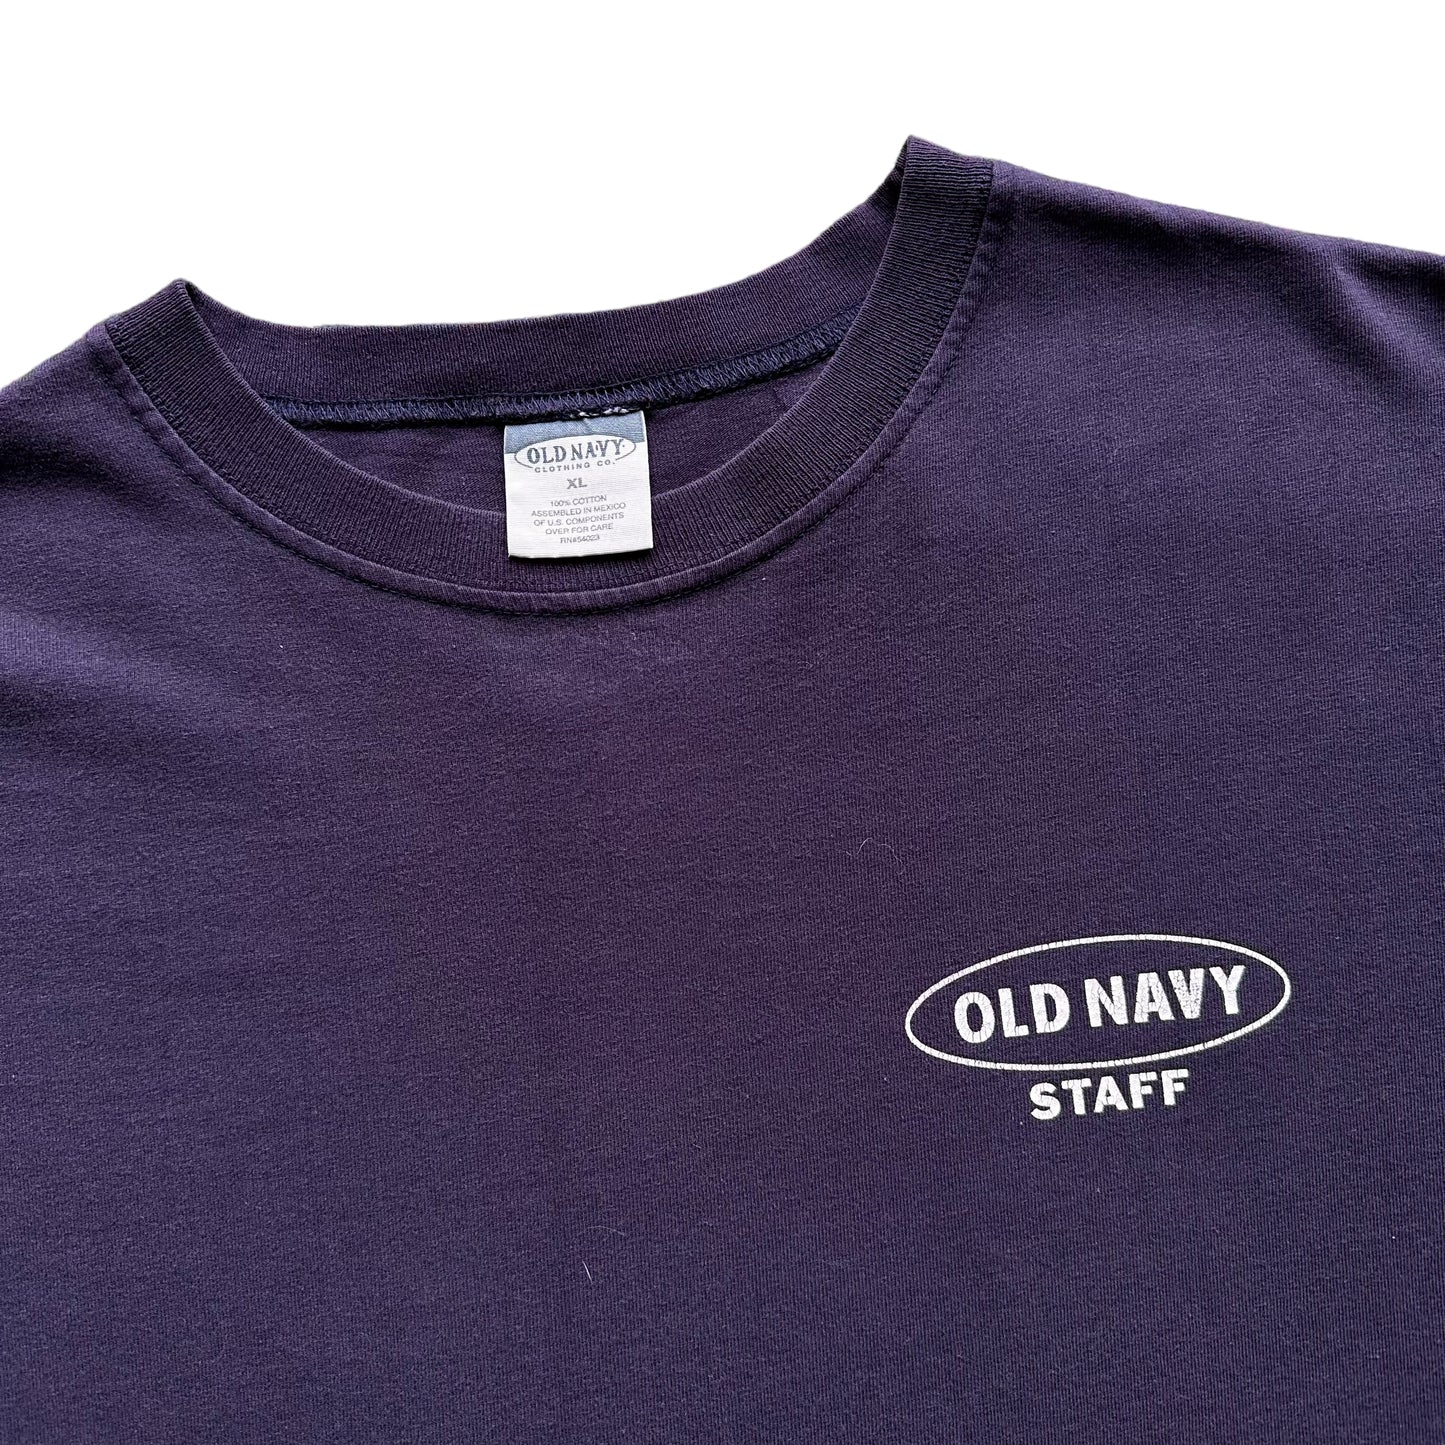 90s Old Navy tee - Extra Large